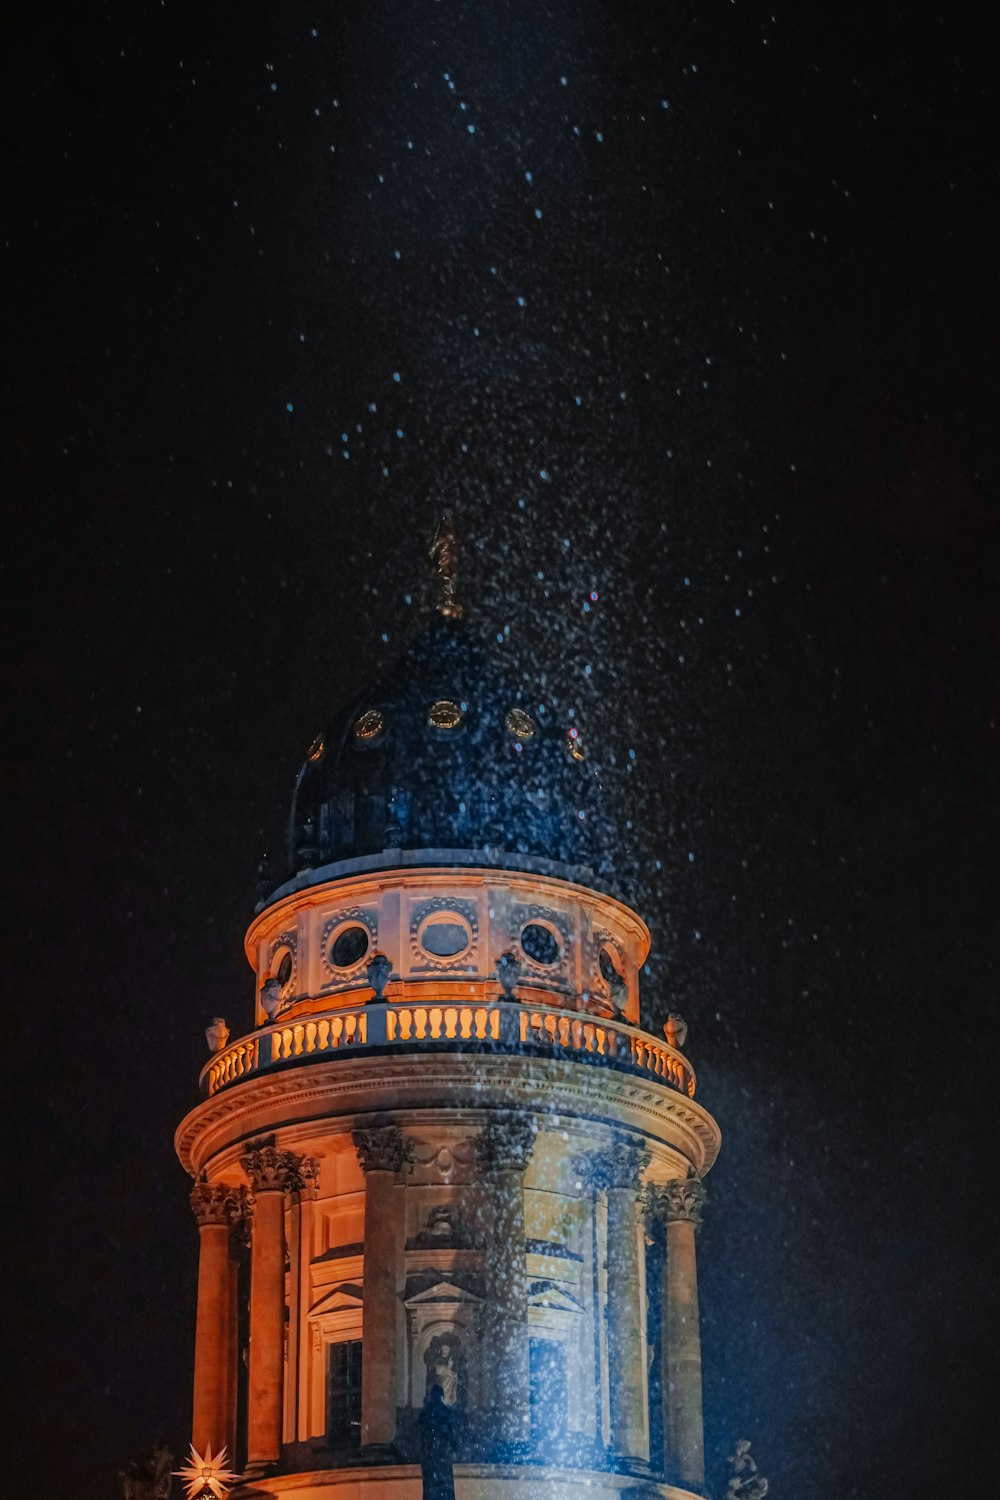 a tower with a clock on it at night